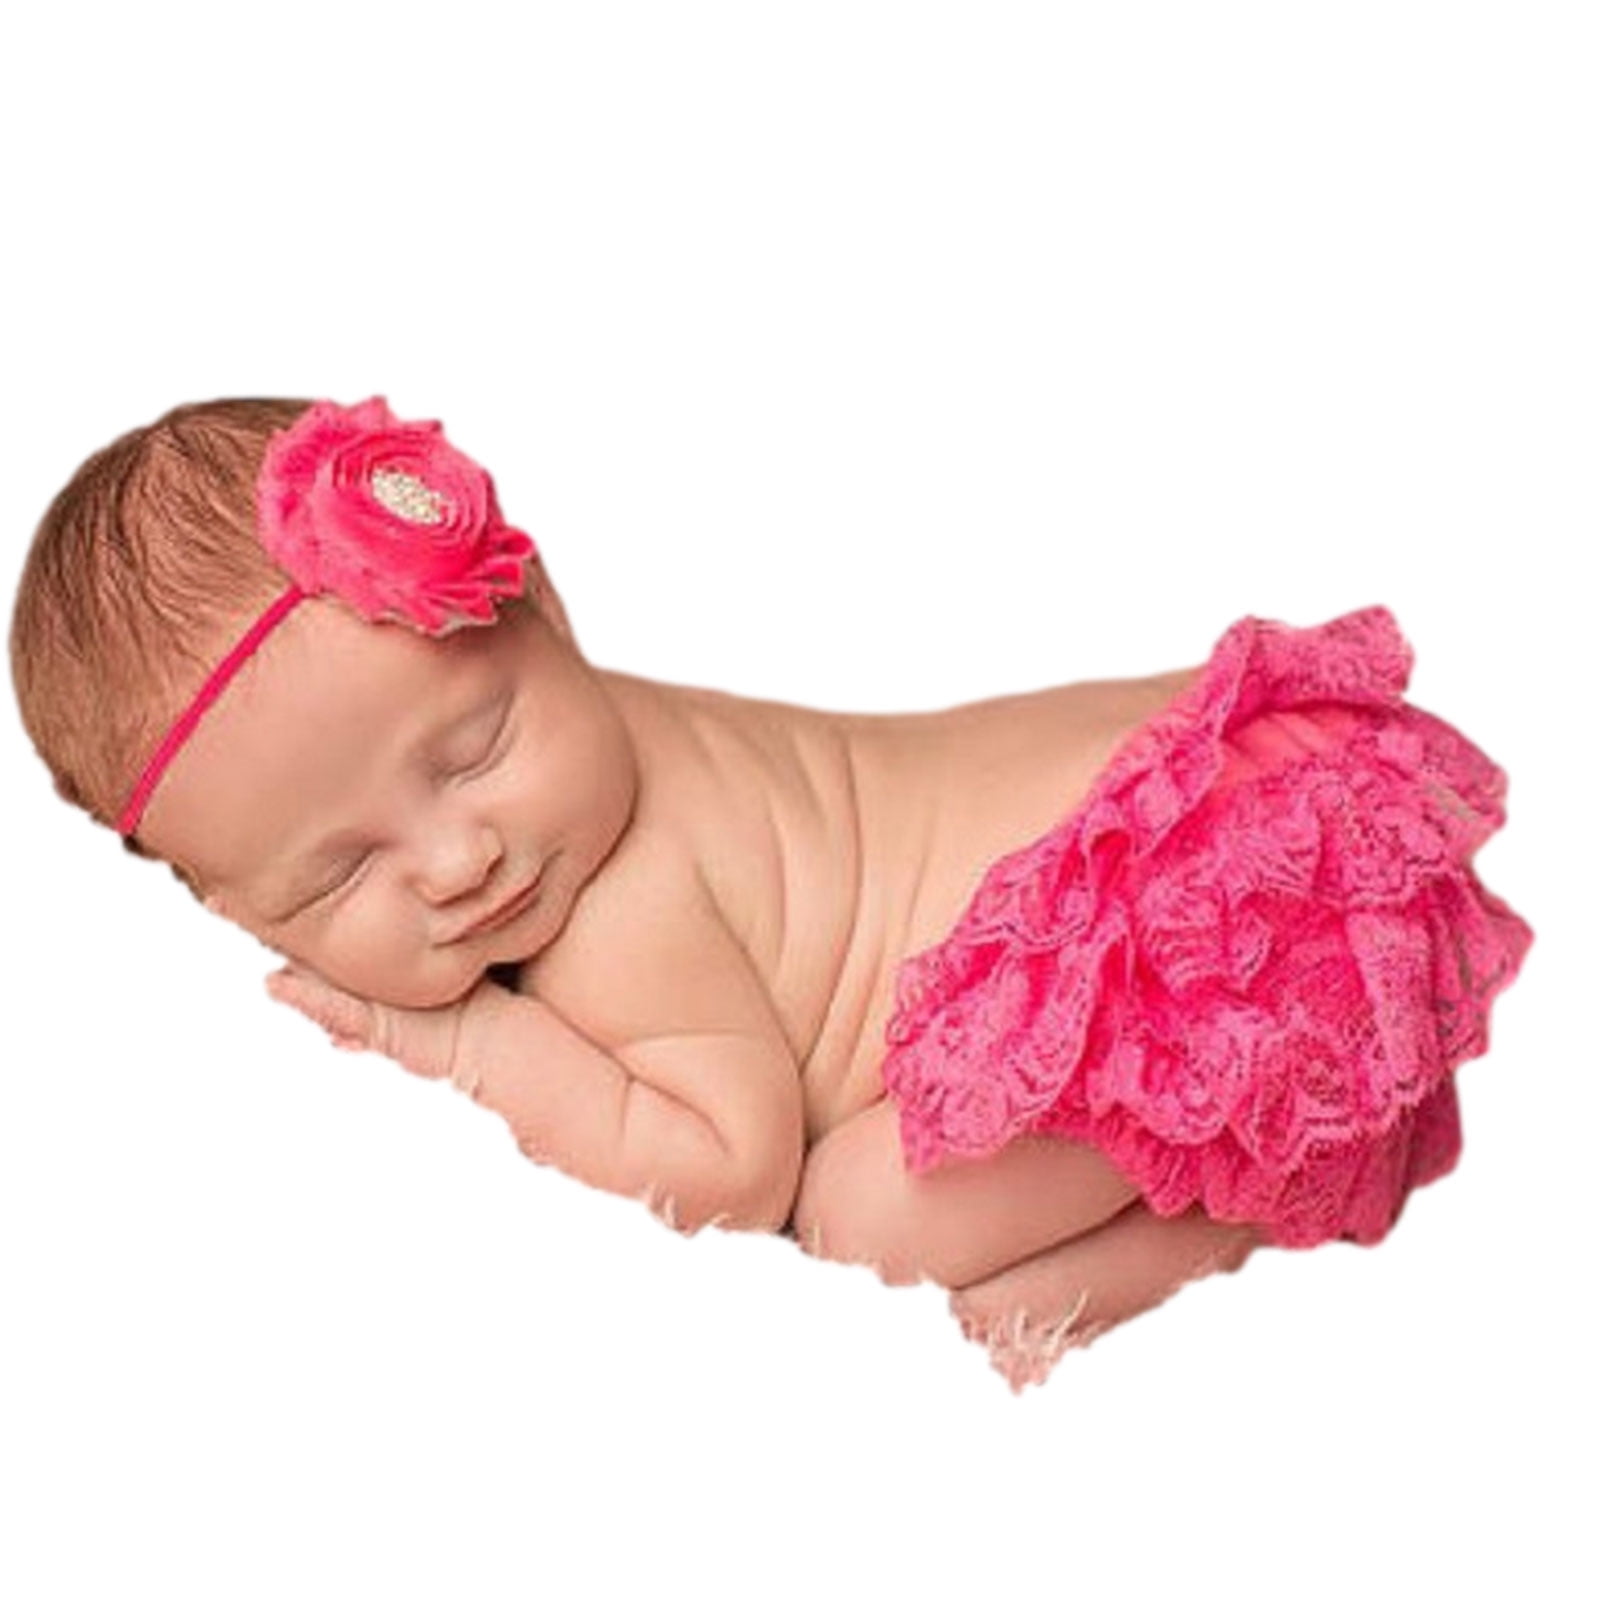 Infant Baby Girls Outfit Ruffled Bloomers Headband Photo Props Set Toddler Cloth